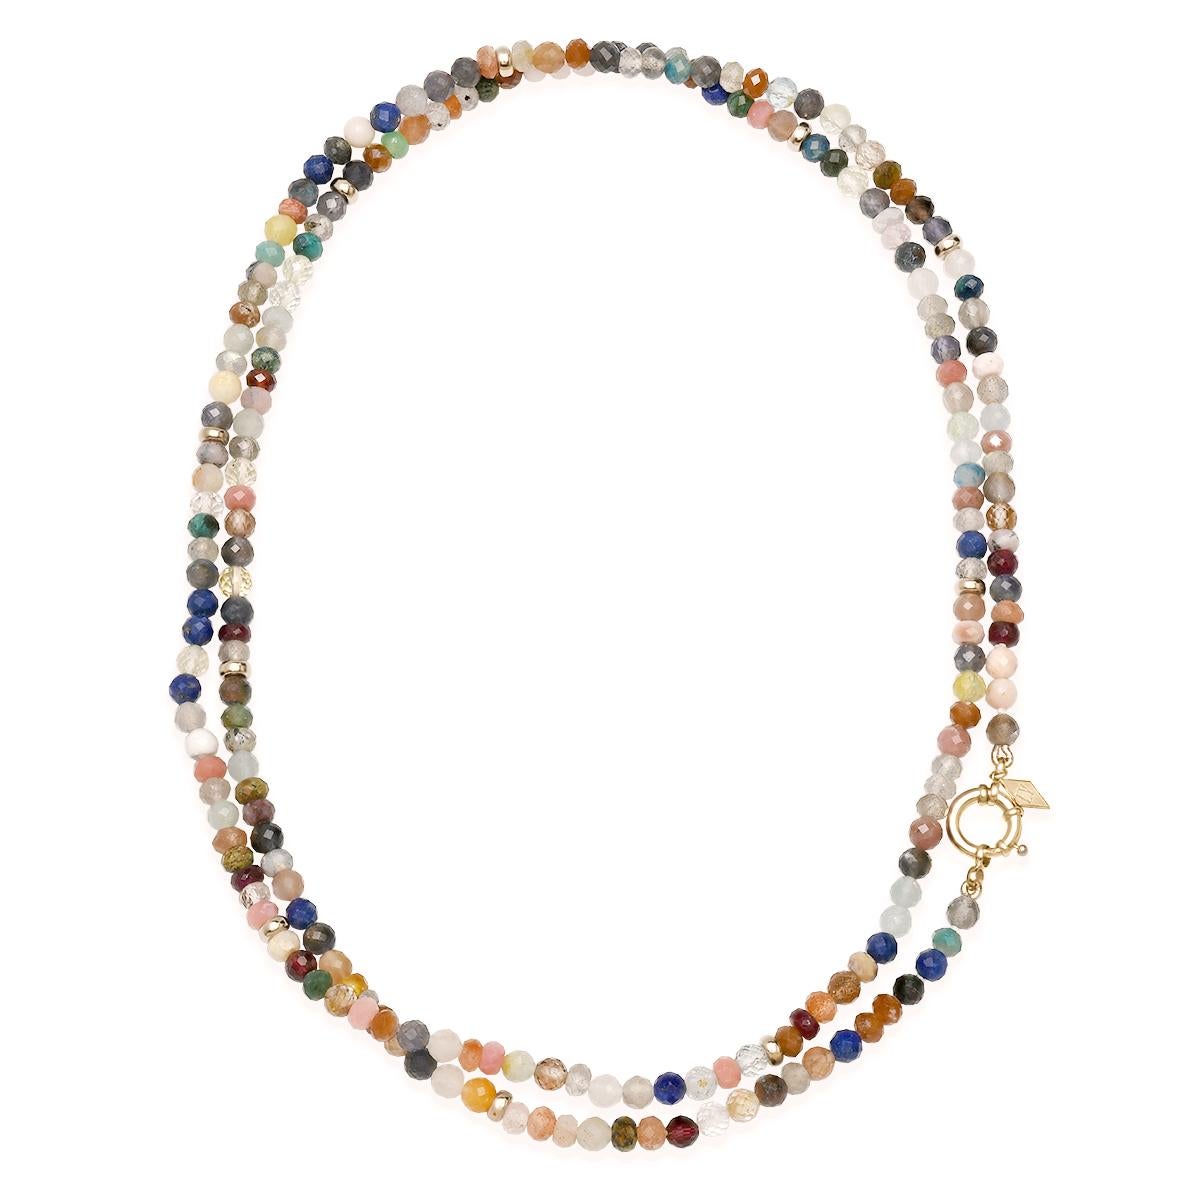 It's all about adding color.... Mixed Gem Necklace with Faceted round and Rondelle Beads features a 14K gold chunky sailor clasp for secure closure, allowing you to easily attach charms, pendants, or medallions to create a personalized,